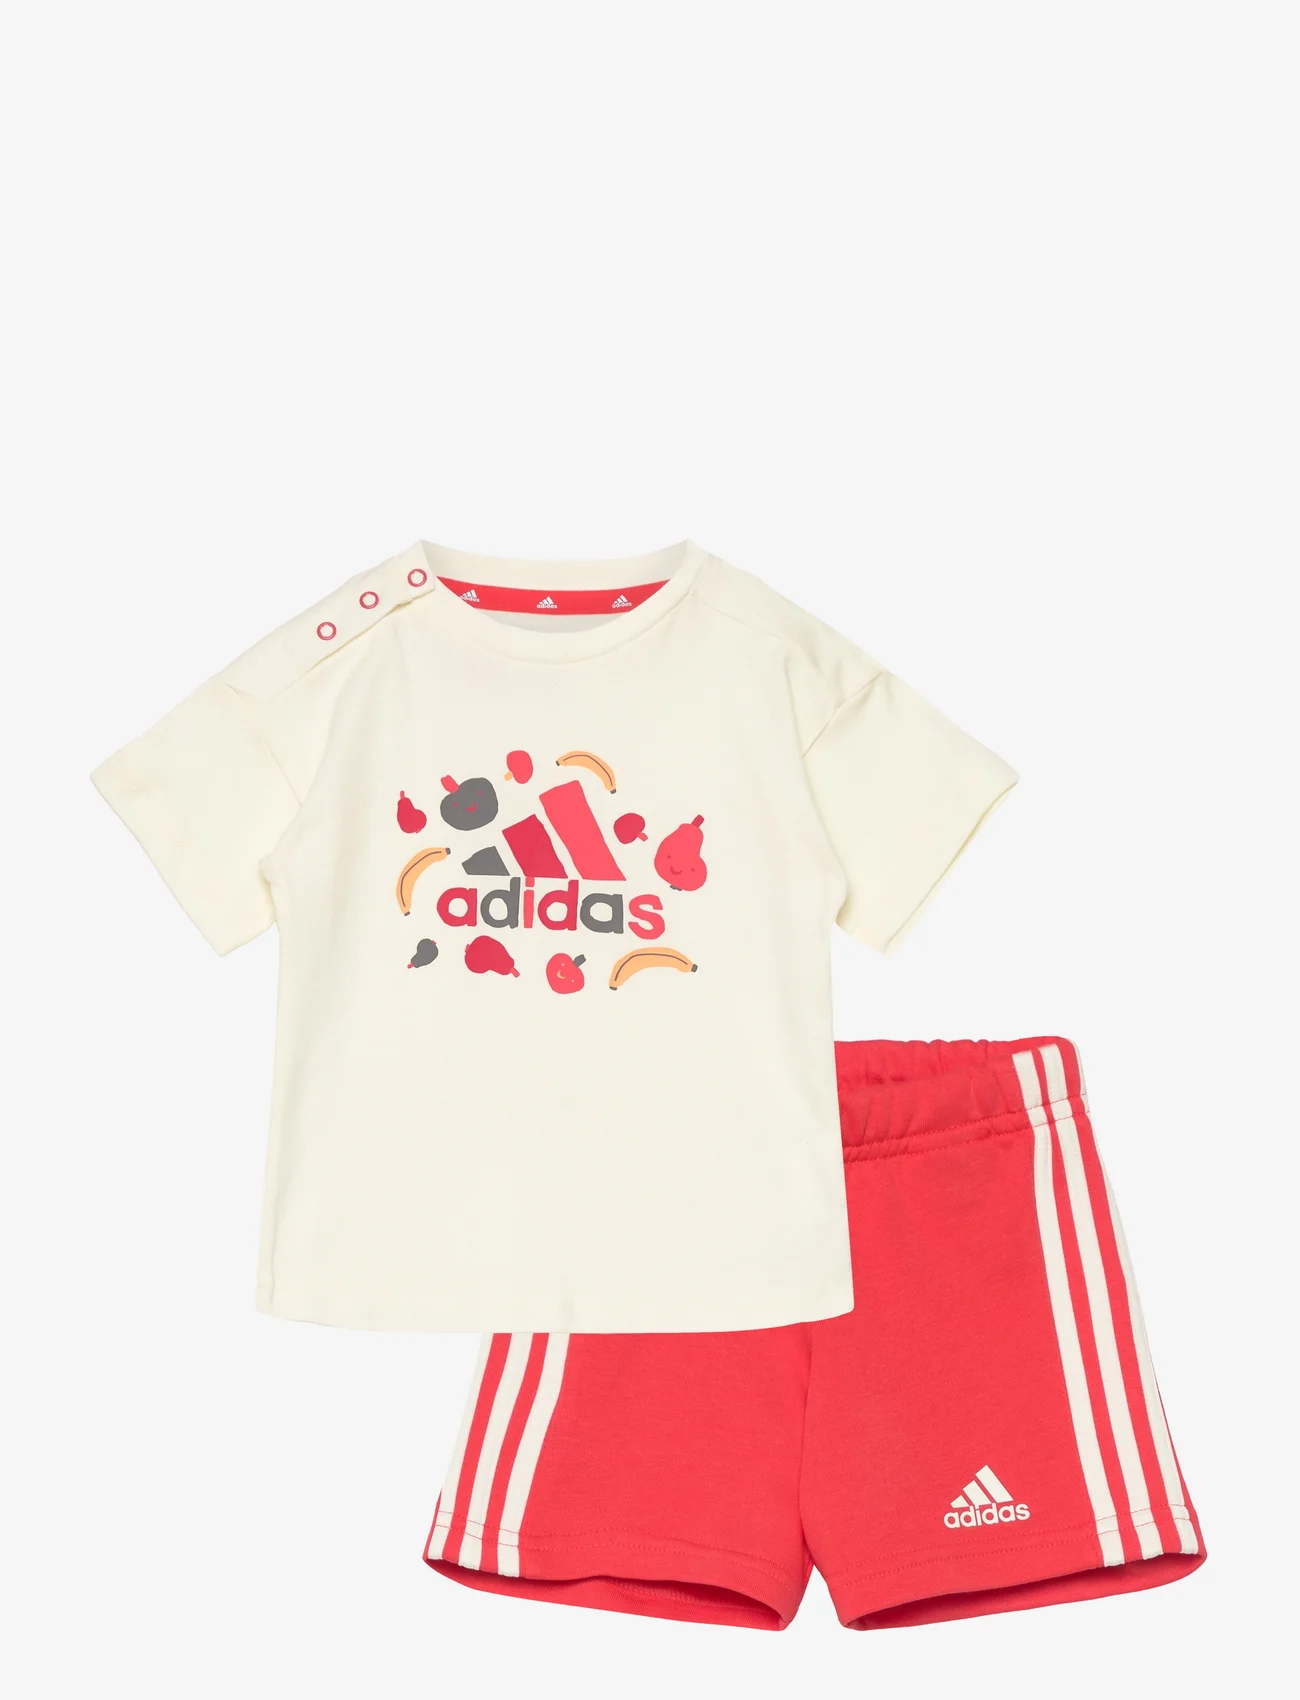 adidas Performance - Essentials Allover Print Tee Set Kids - lowest prices - ivory/brired - 0